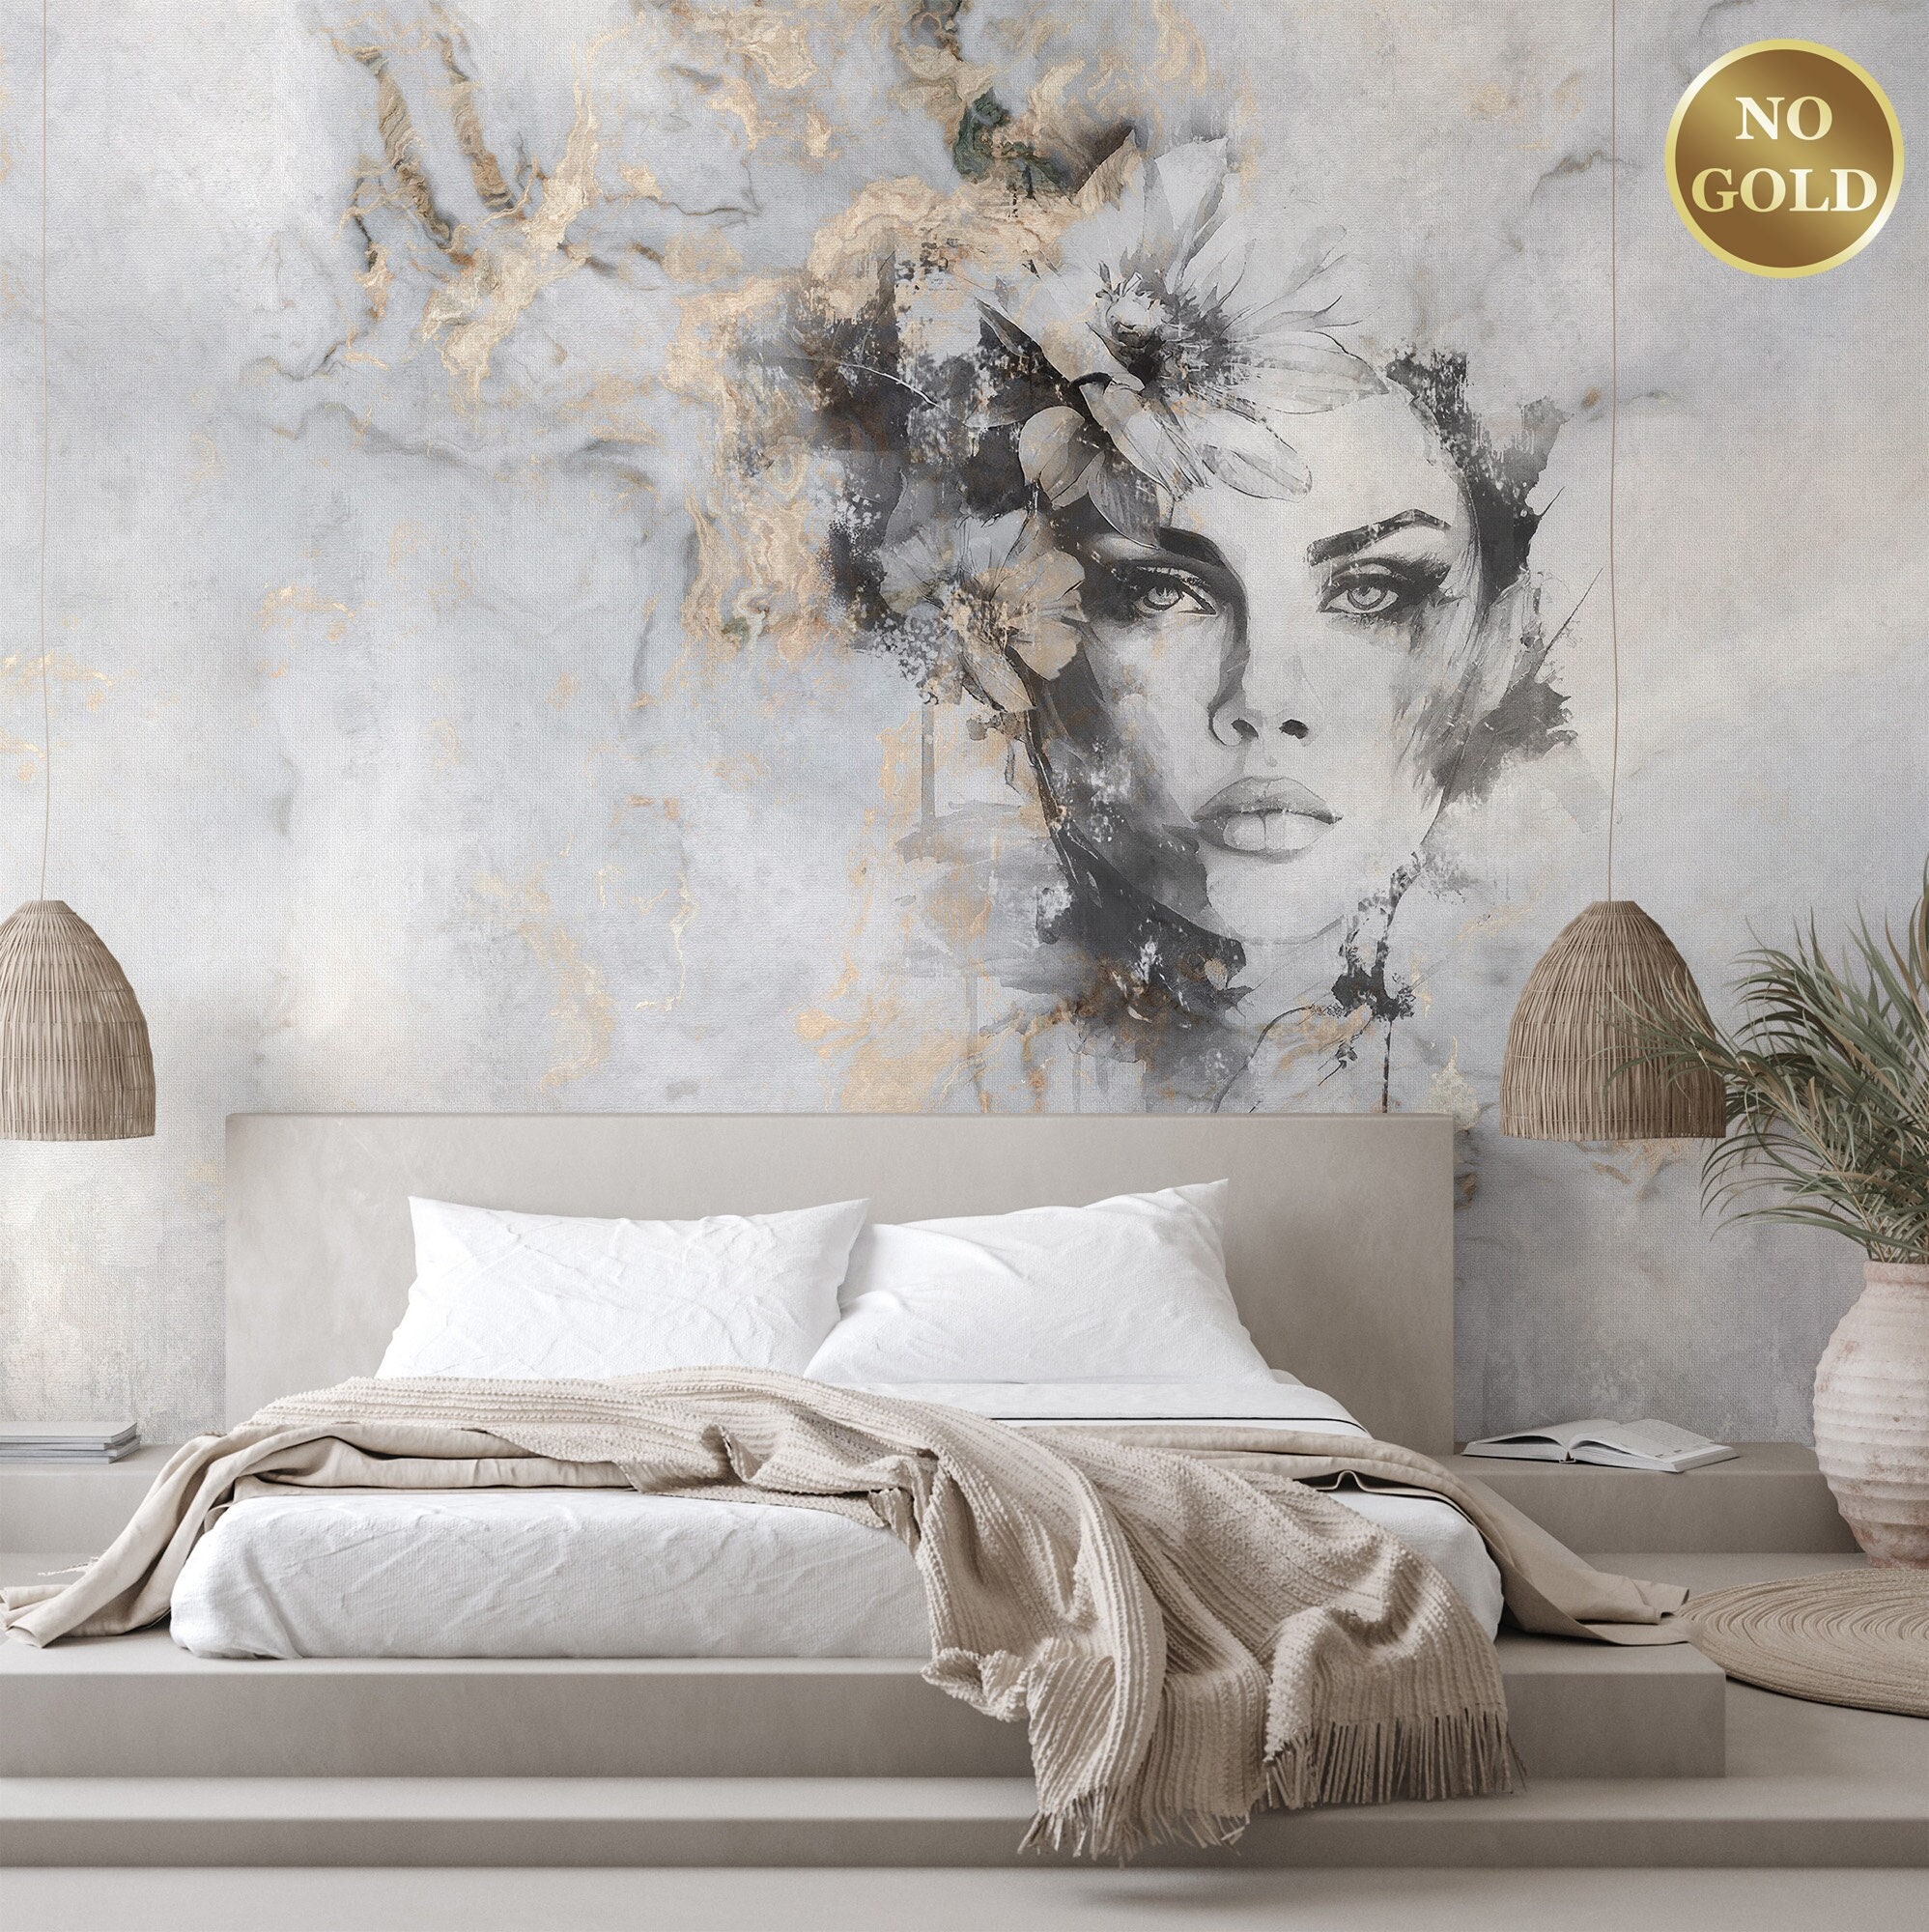 Climate Change Grunge Posters Wall Mural, Vintage Murals